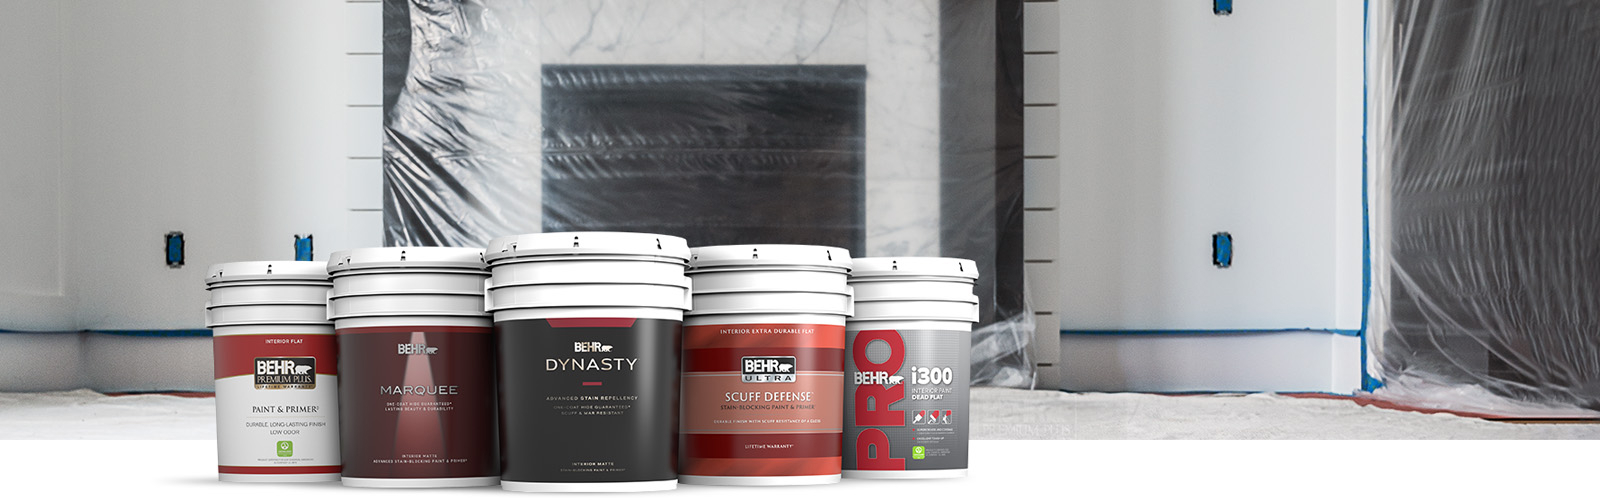 BEHR Interior Product line of Products